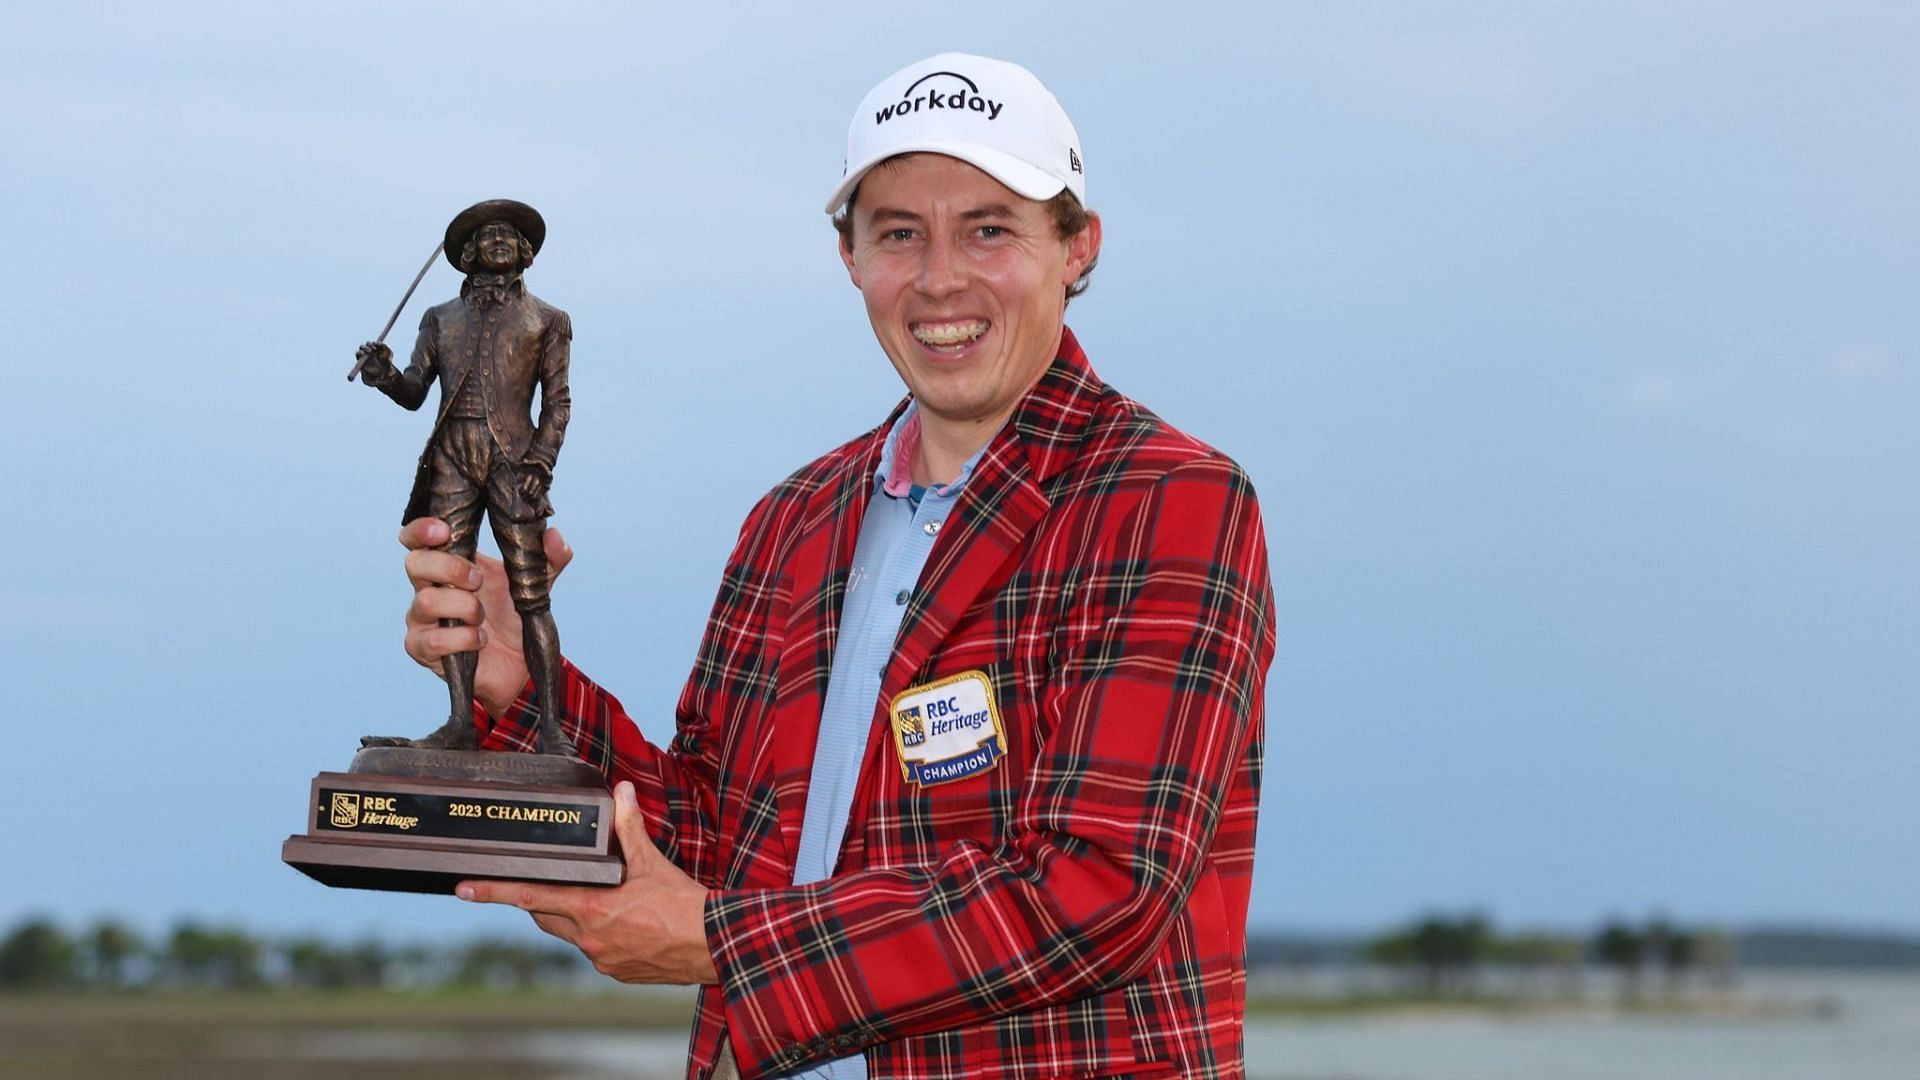 Fitzpatrick poses with the RBC Heritage event trophy